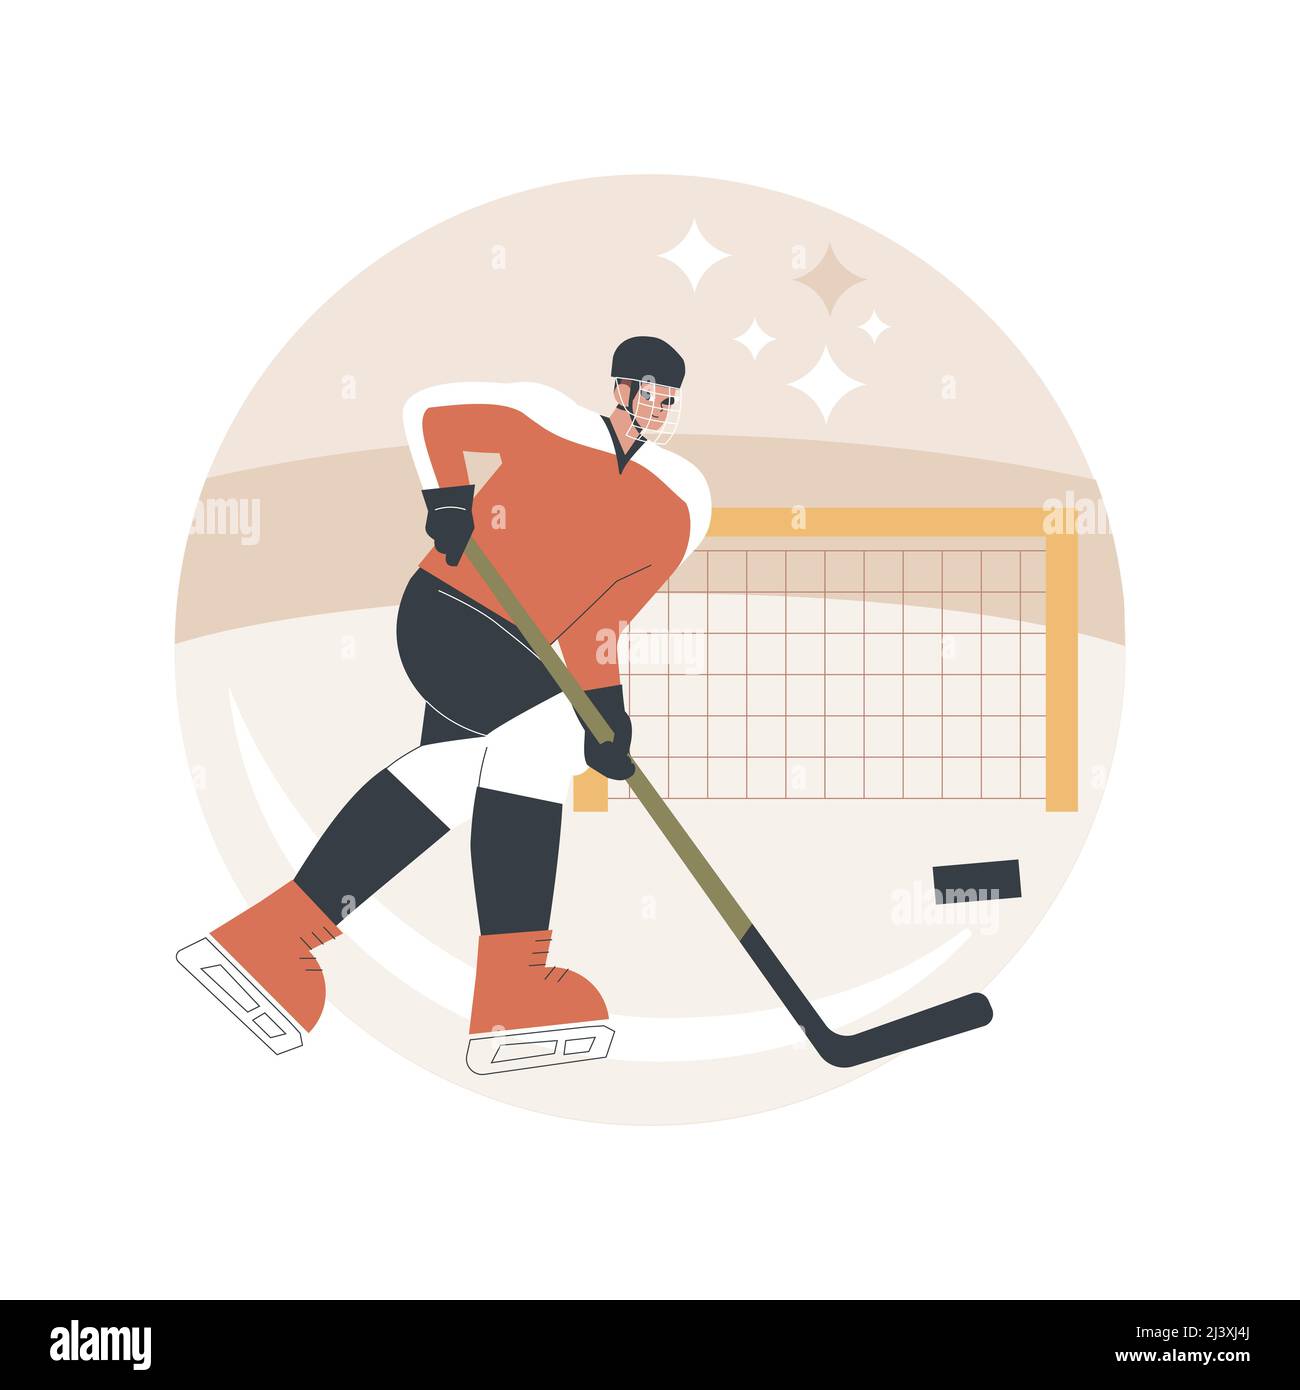 Ice Hockey abstract concept vector illustration